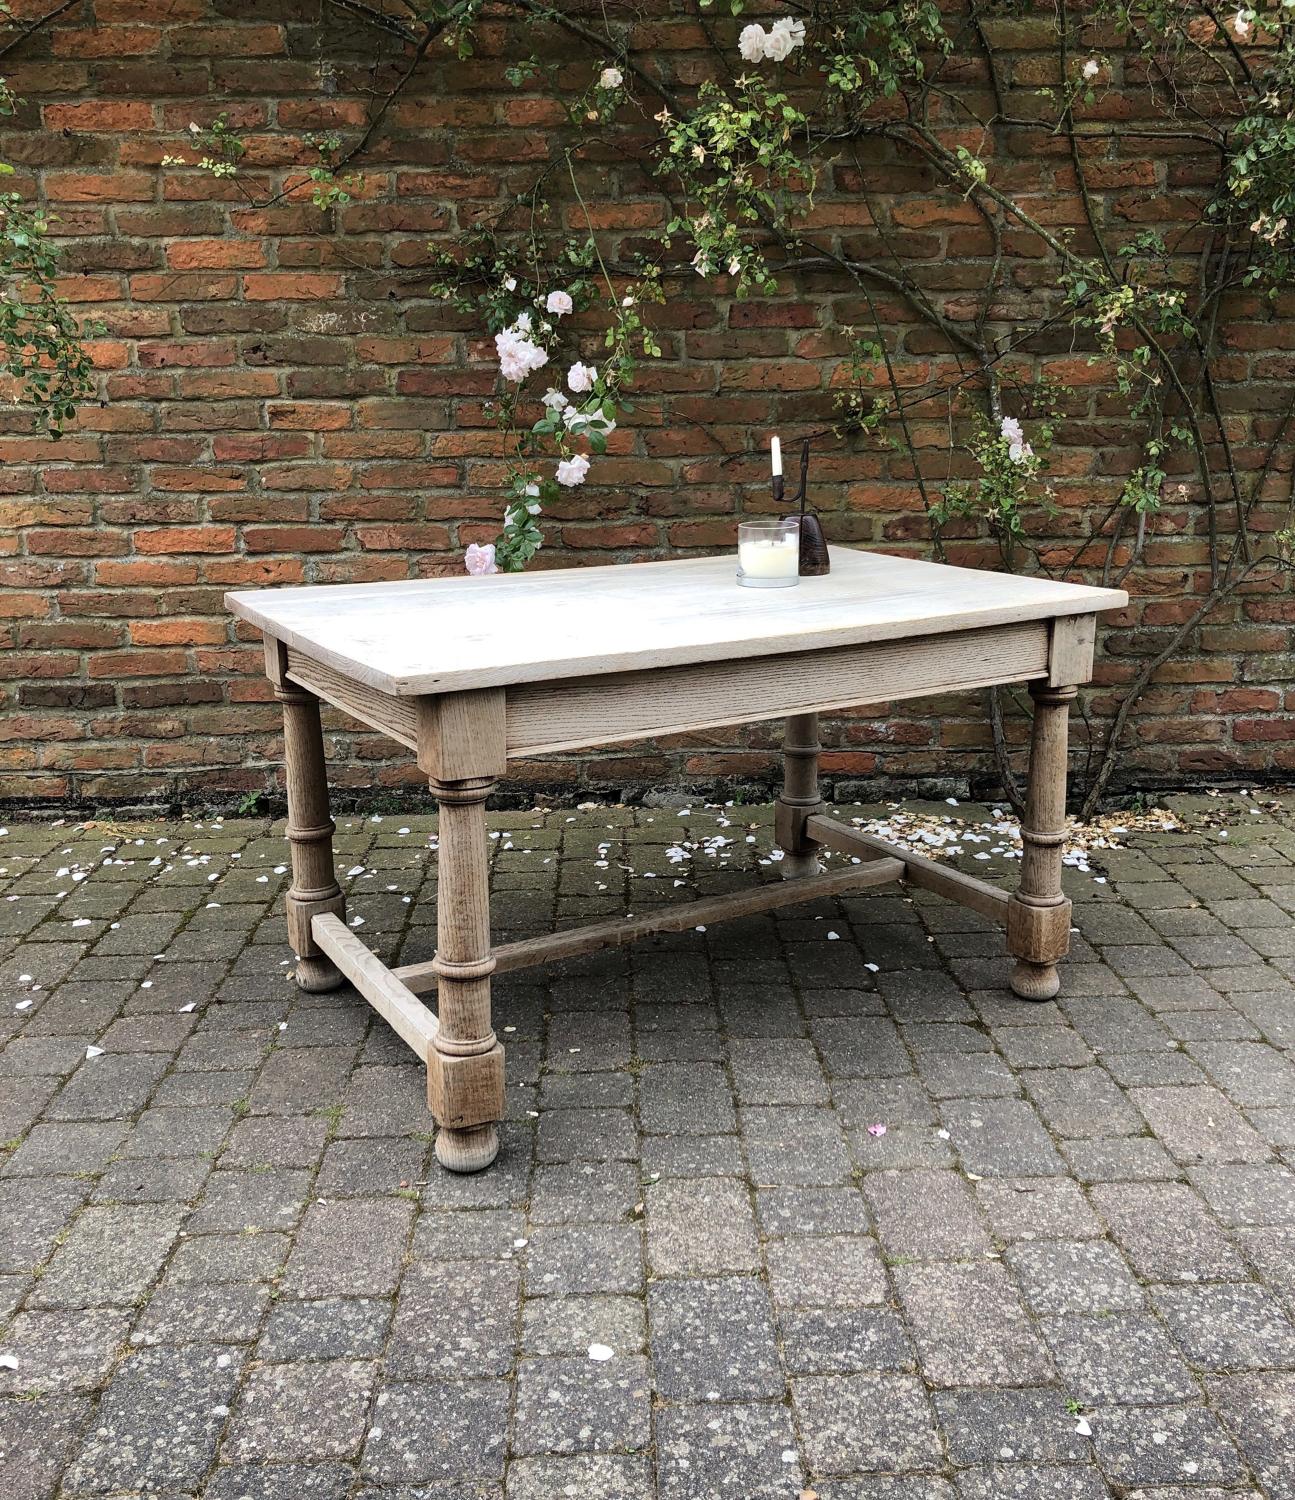 Early 20th Century Bleached Oak Table - Seats Six Easily